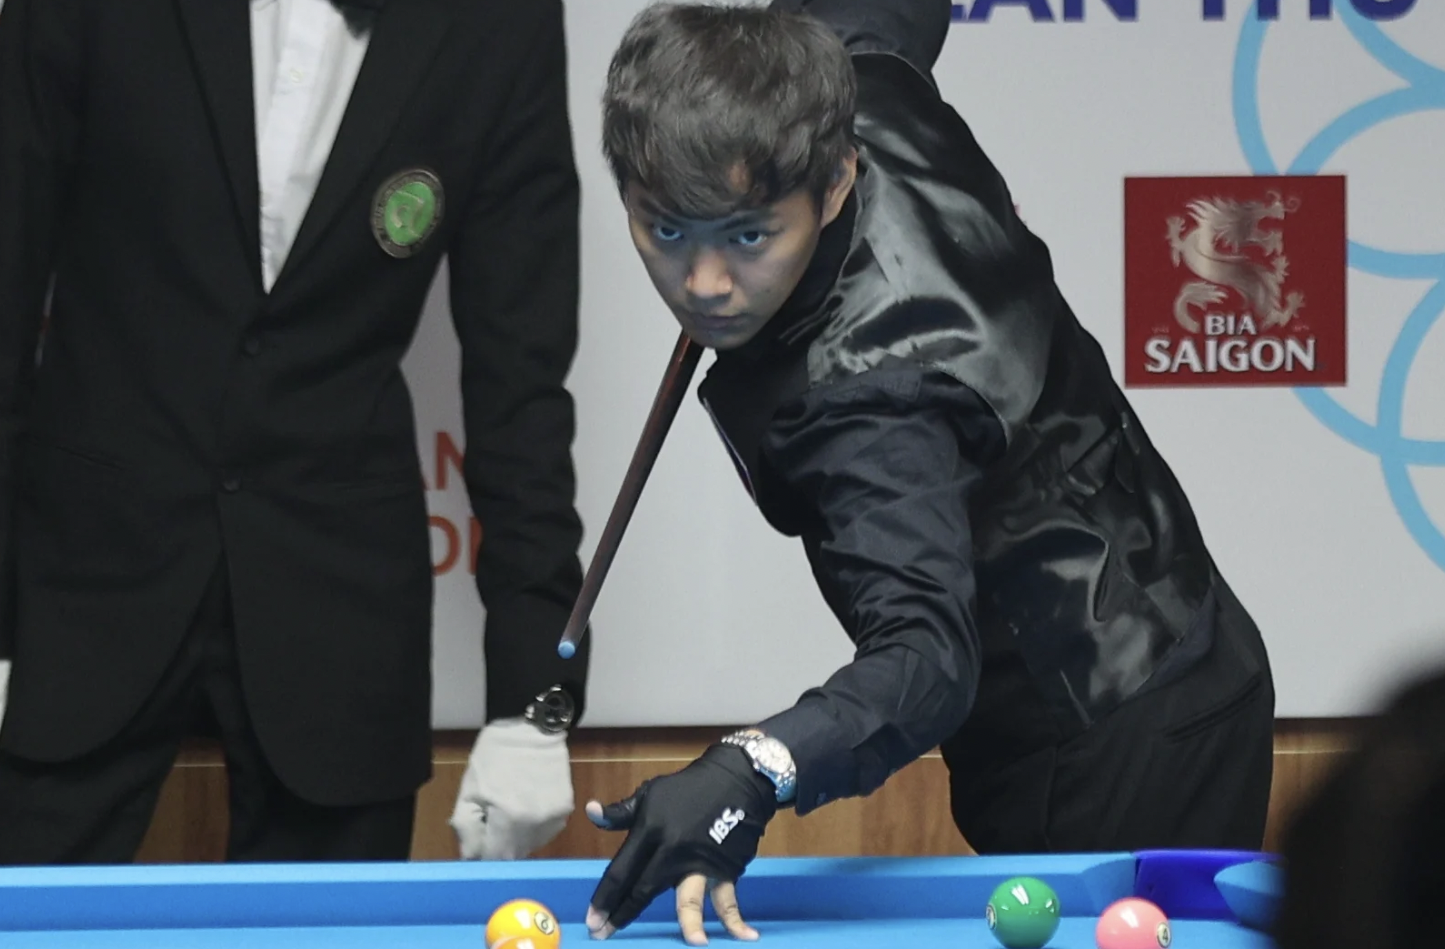 Johann Chua playing in the men's 9 ball event during the 31st SEA Games in Hanoi, Vietnam. SEA GAMES POOL